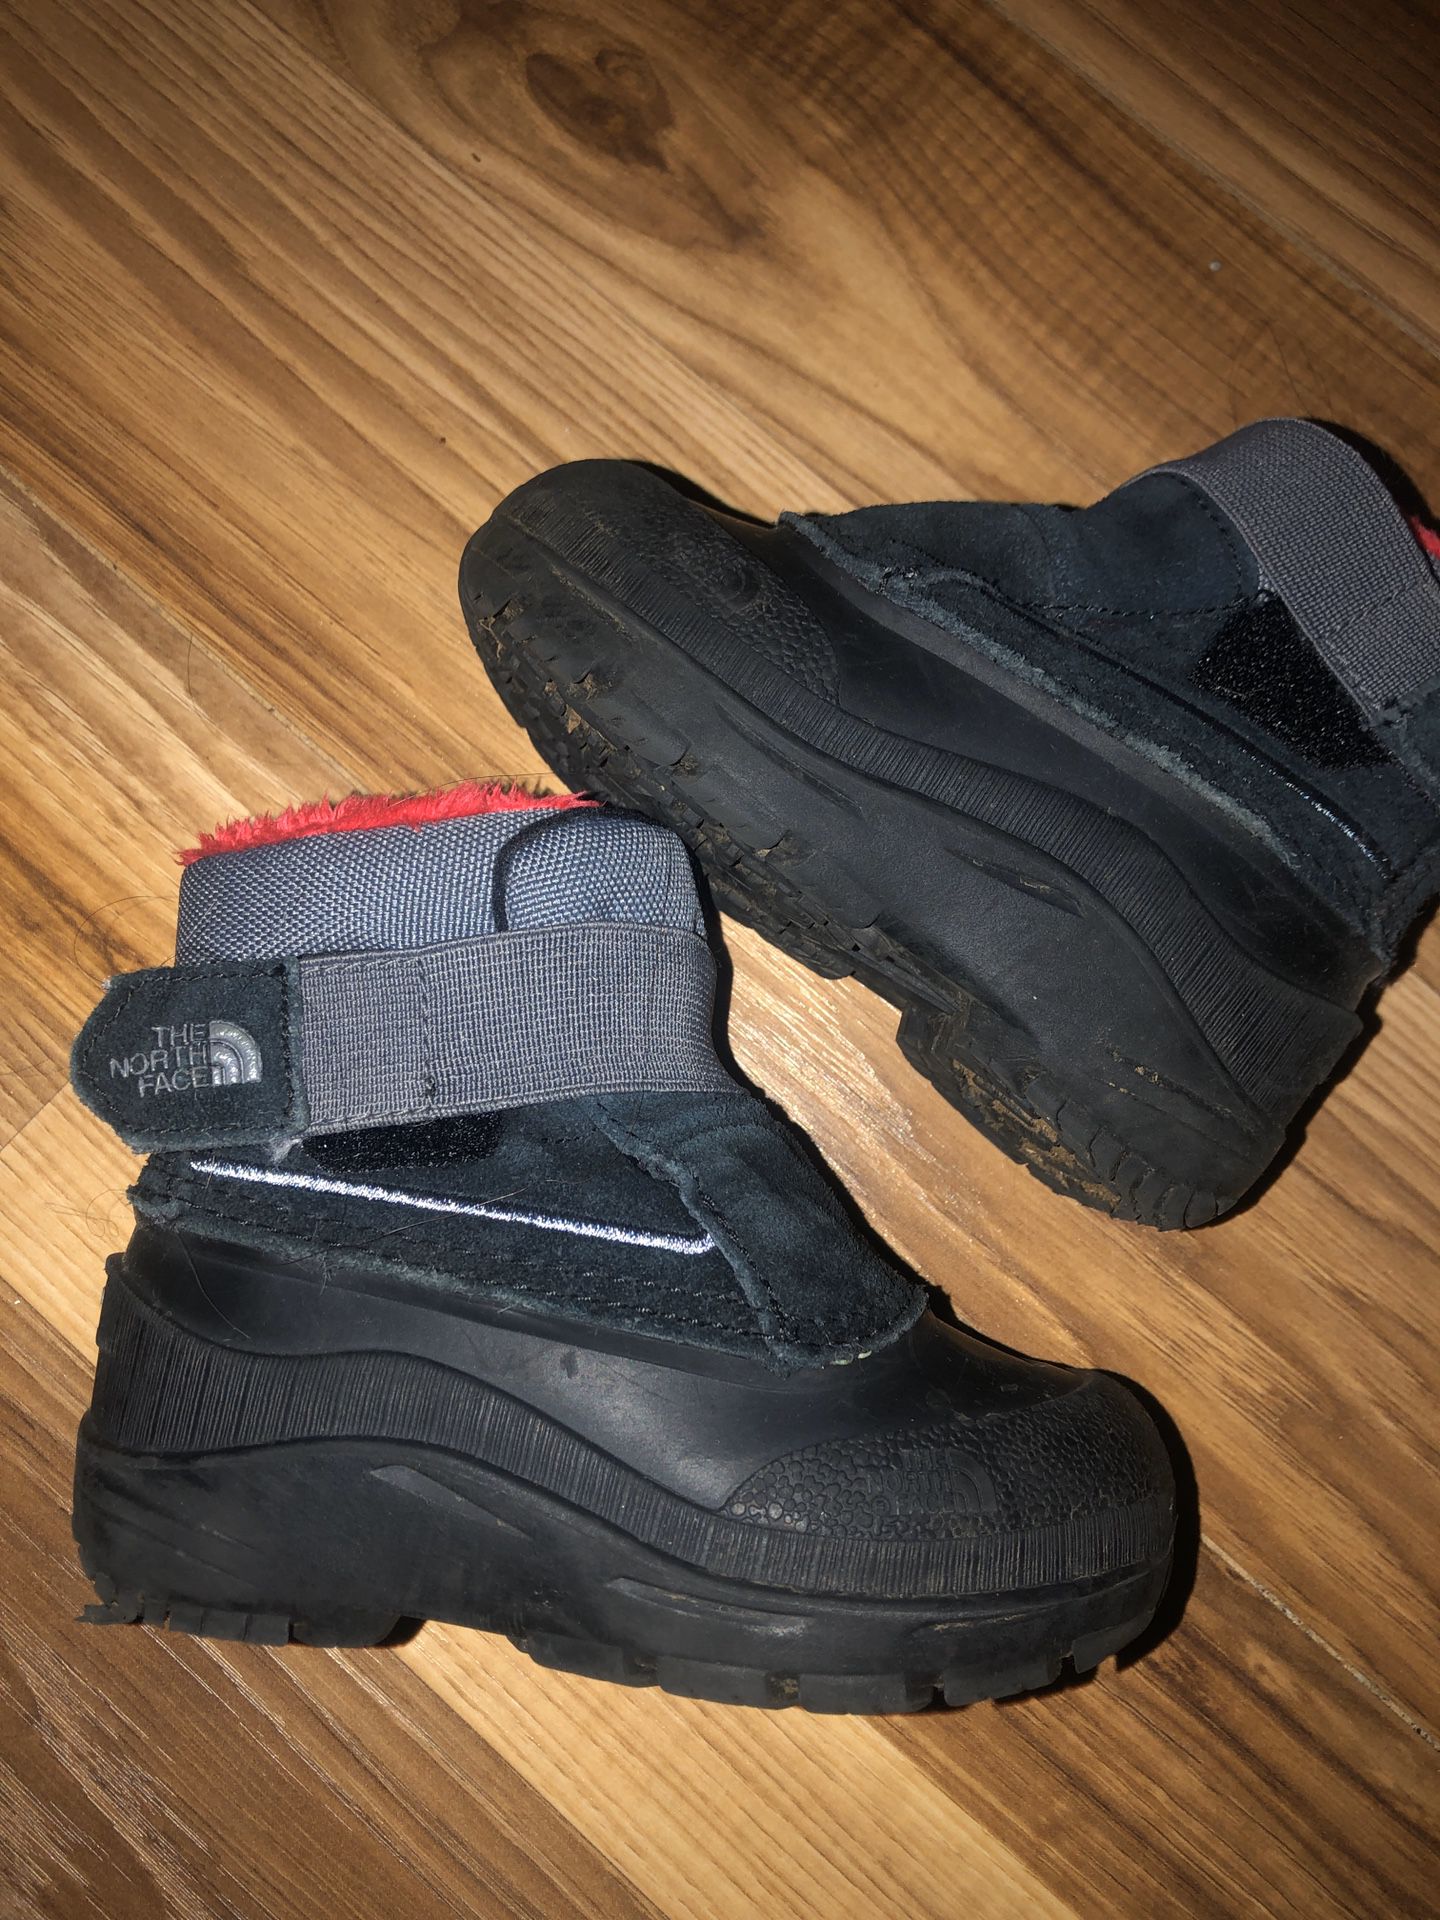 Toddler The North Face boots